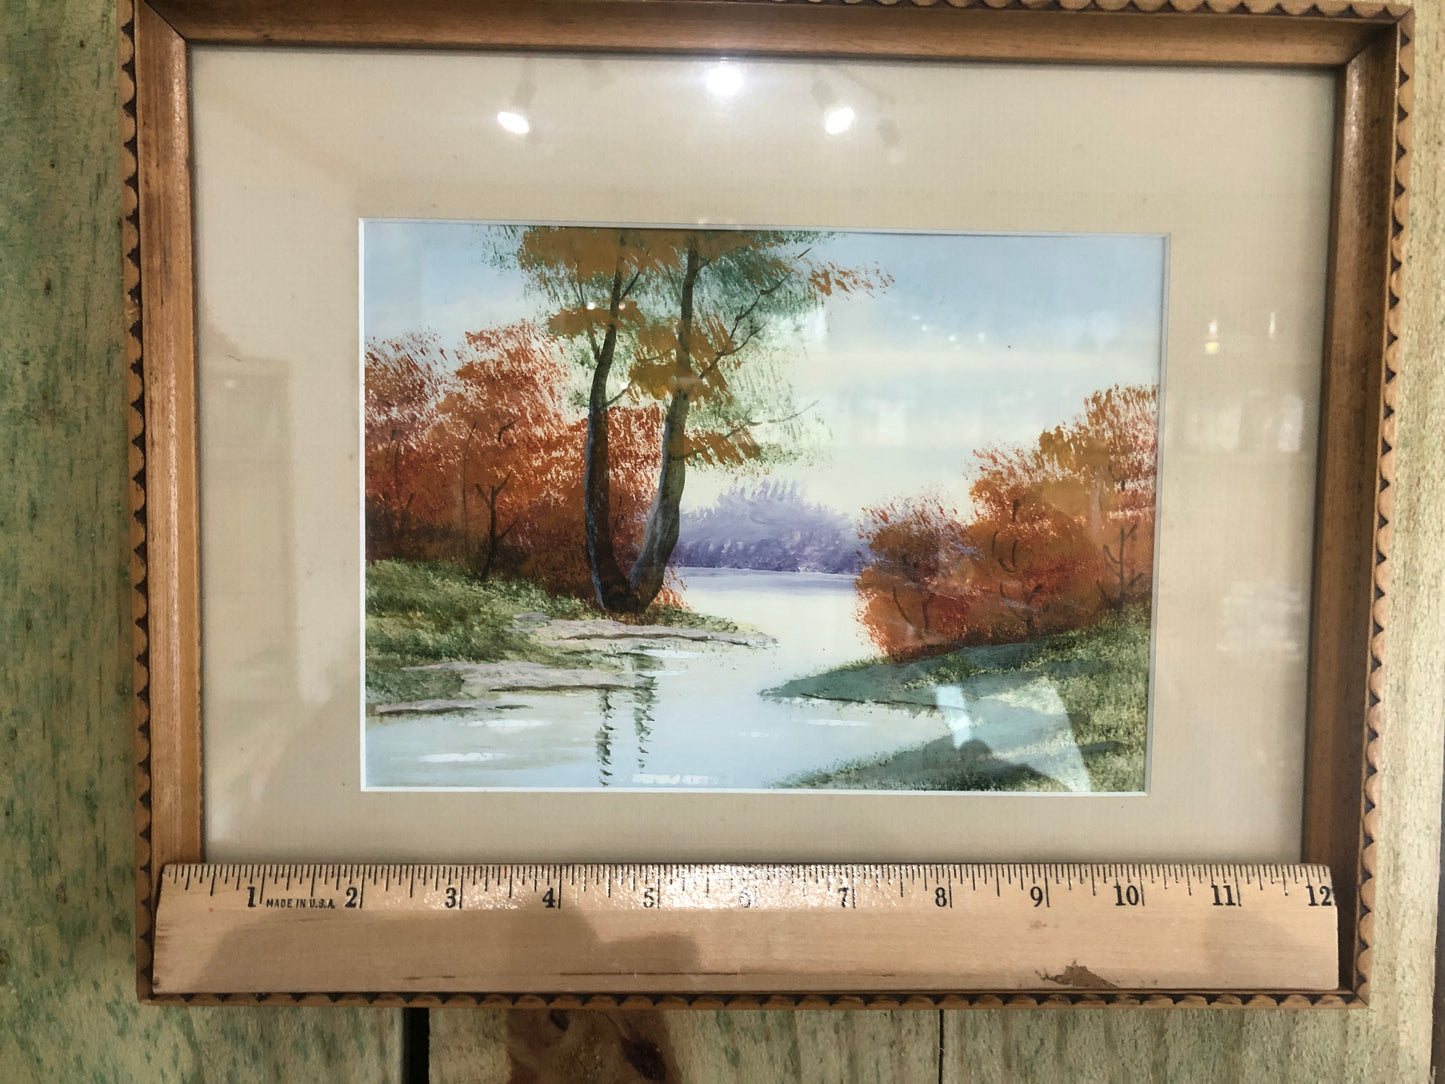 Fall Landscape Painting Signed by Aronigie